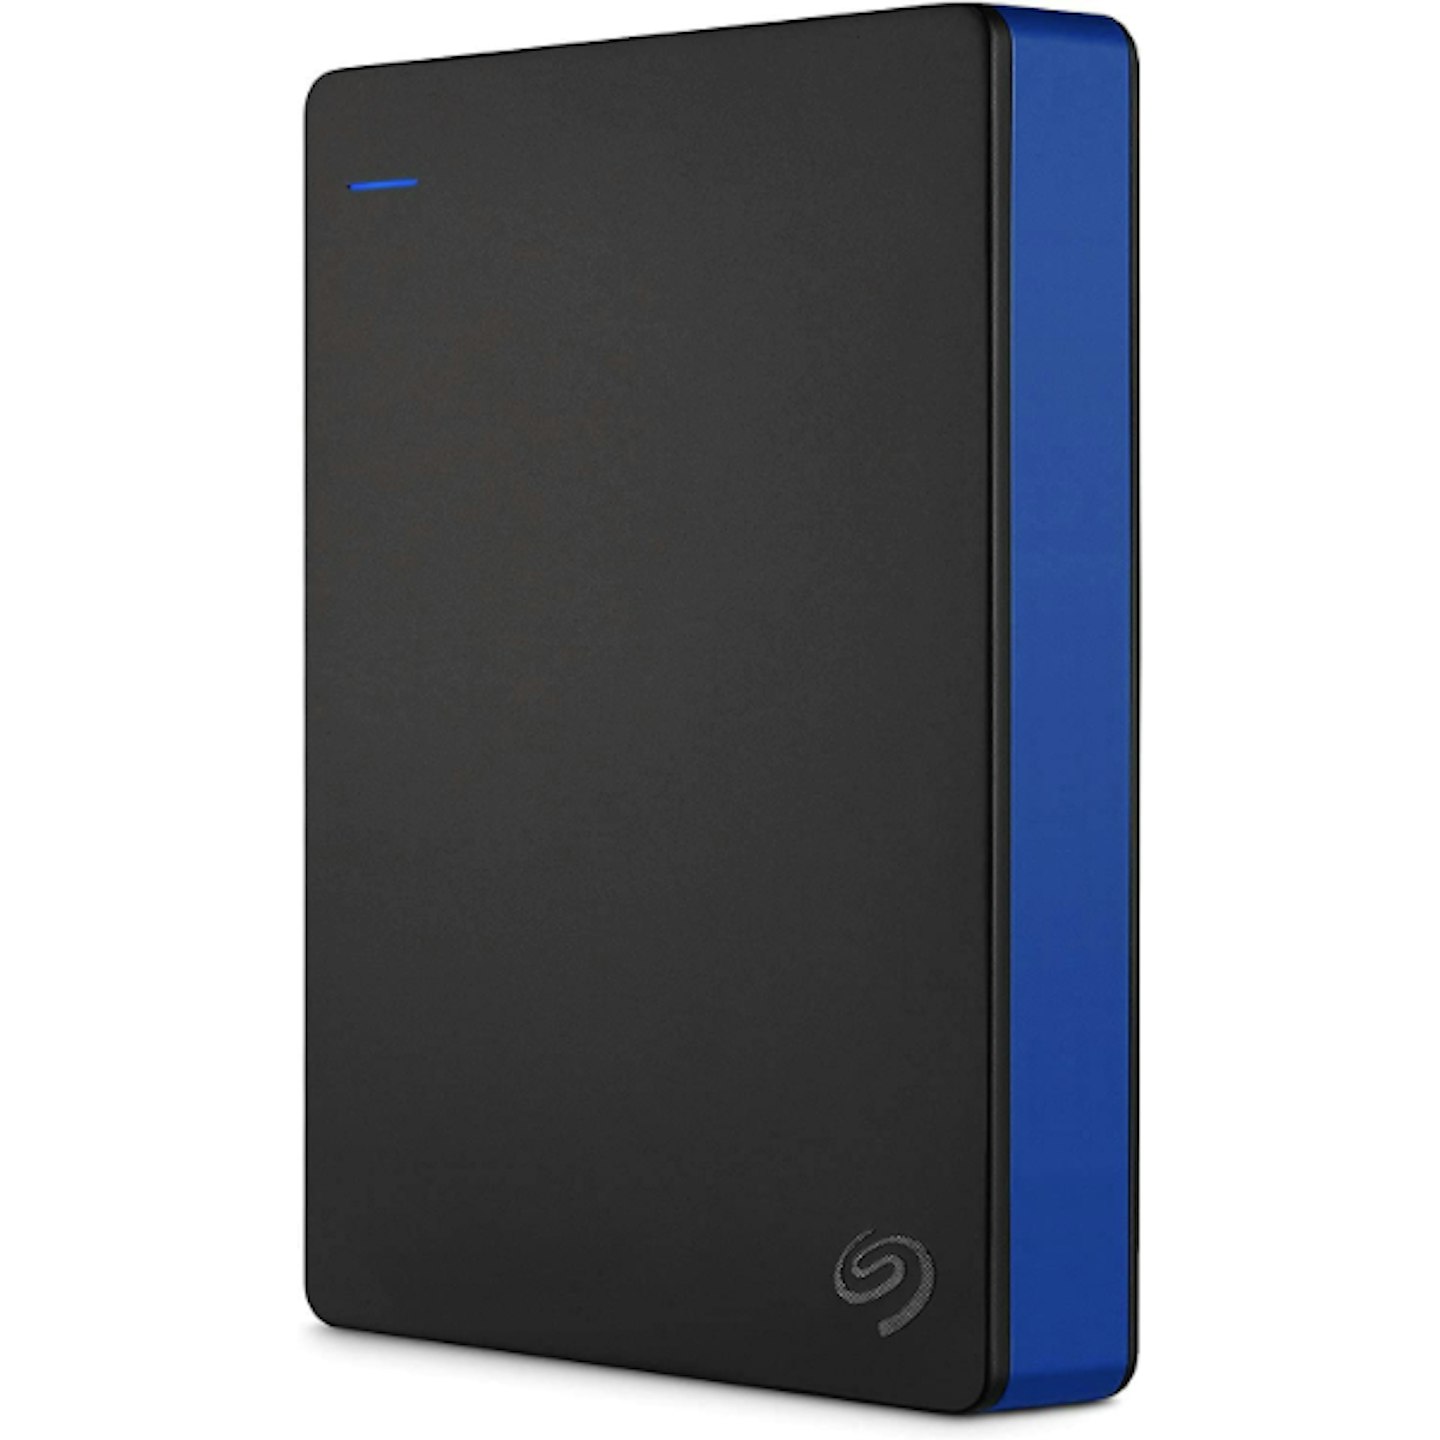 Seagate PlayStation Game Drive HDD